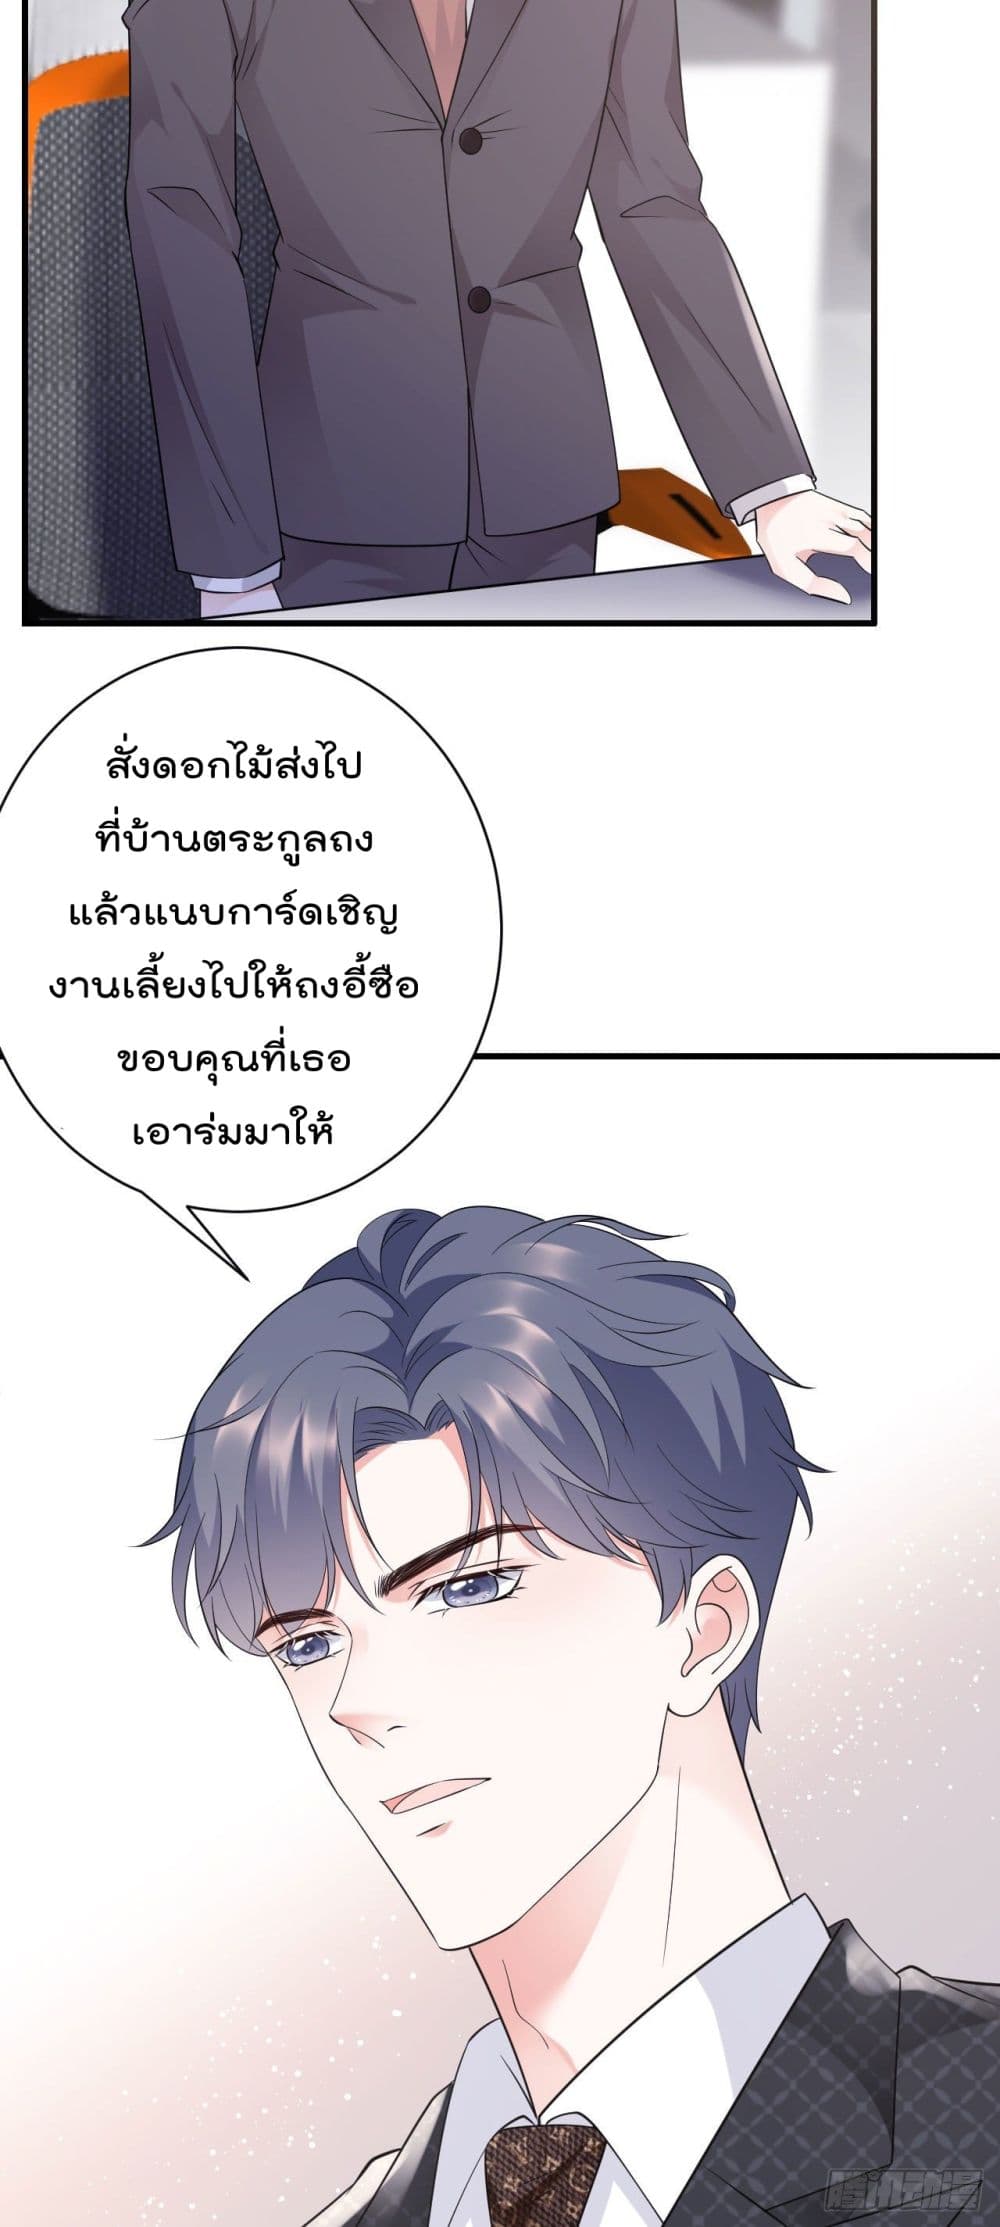 What Can the Eldest Lady Have คุณหนูใหญ่ ทำไมคุณร้ายอย่างนี้ 19-19